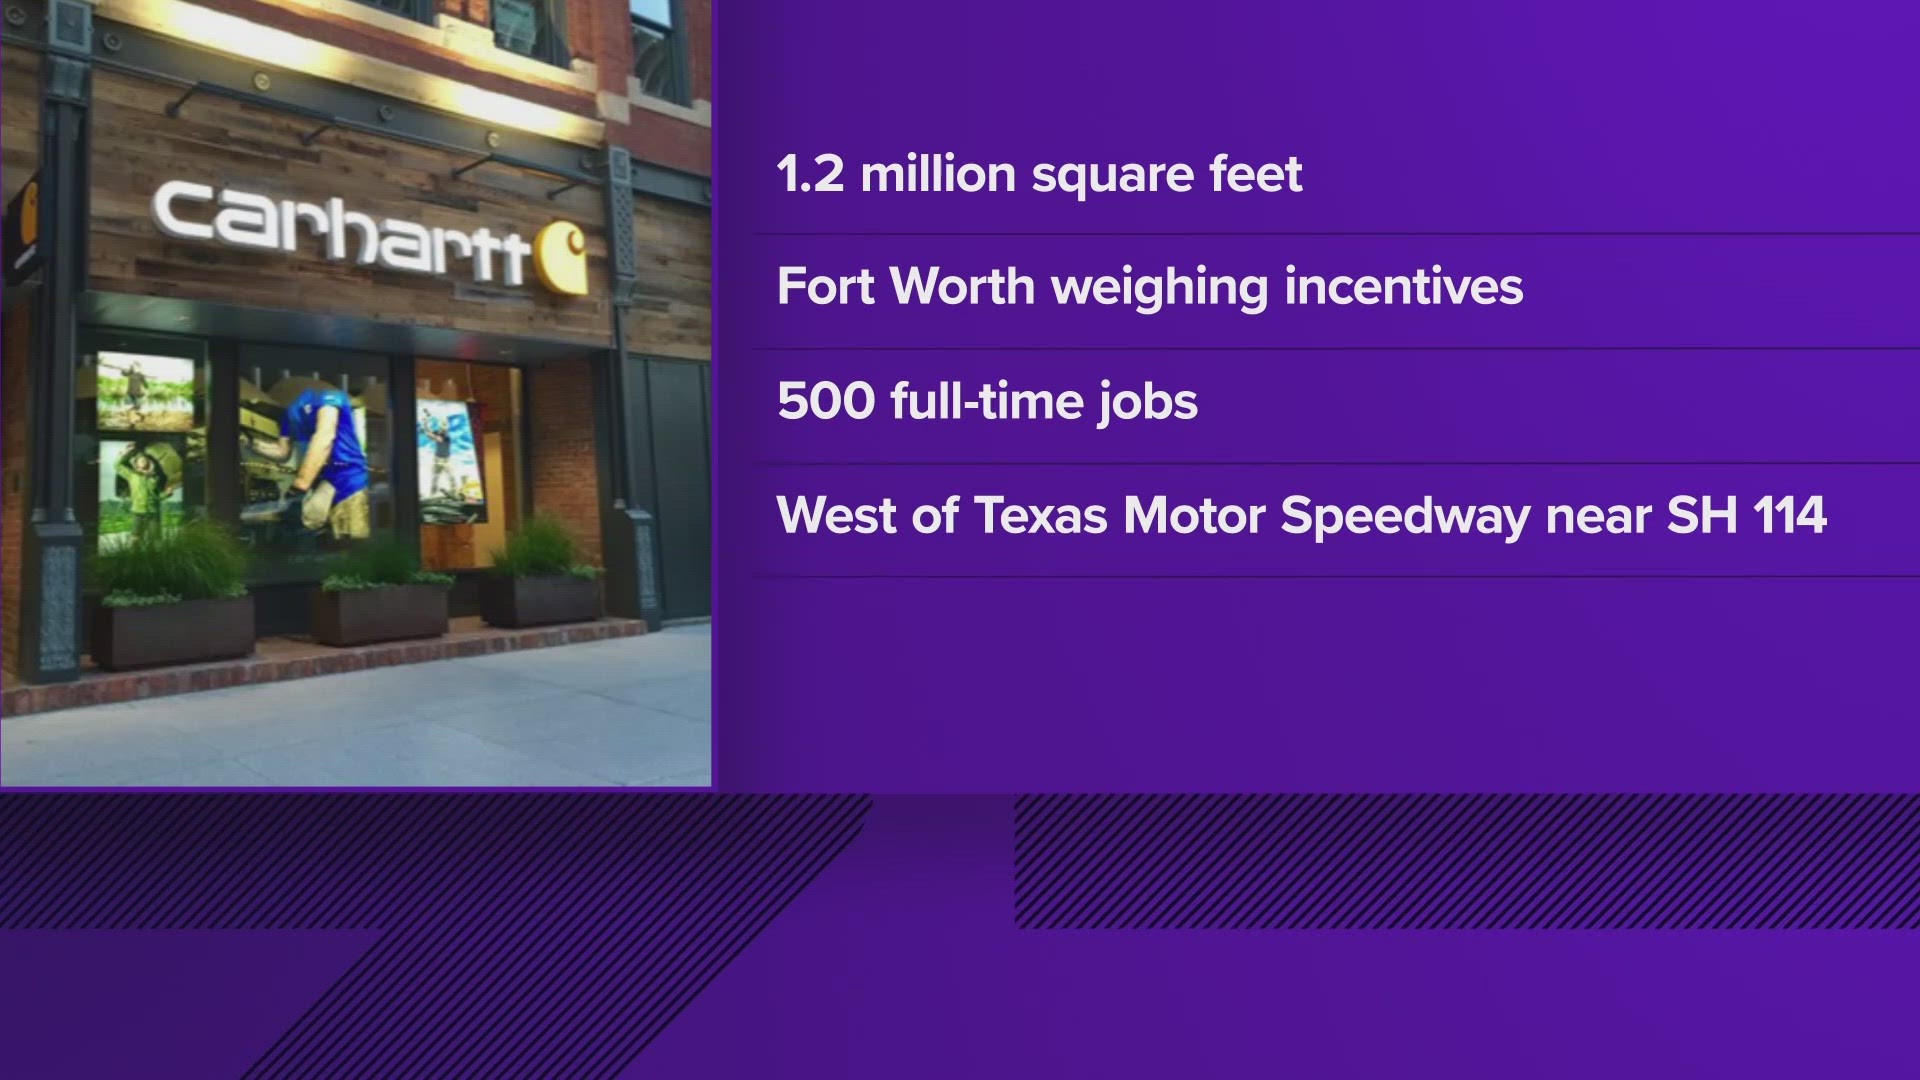 The City of Fort Worth will weigh incentives for the project, which would bring about 500 full-time jobs to the city.